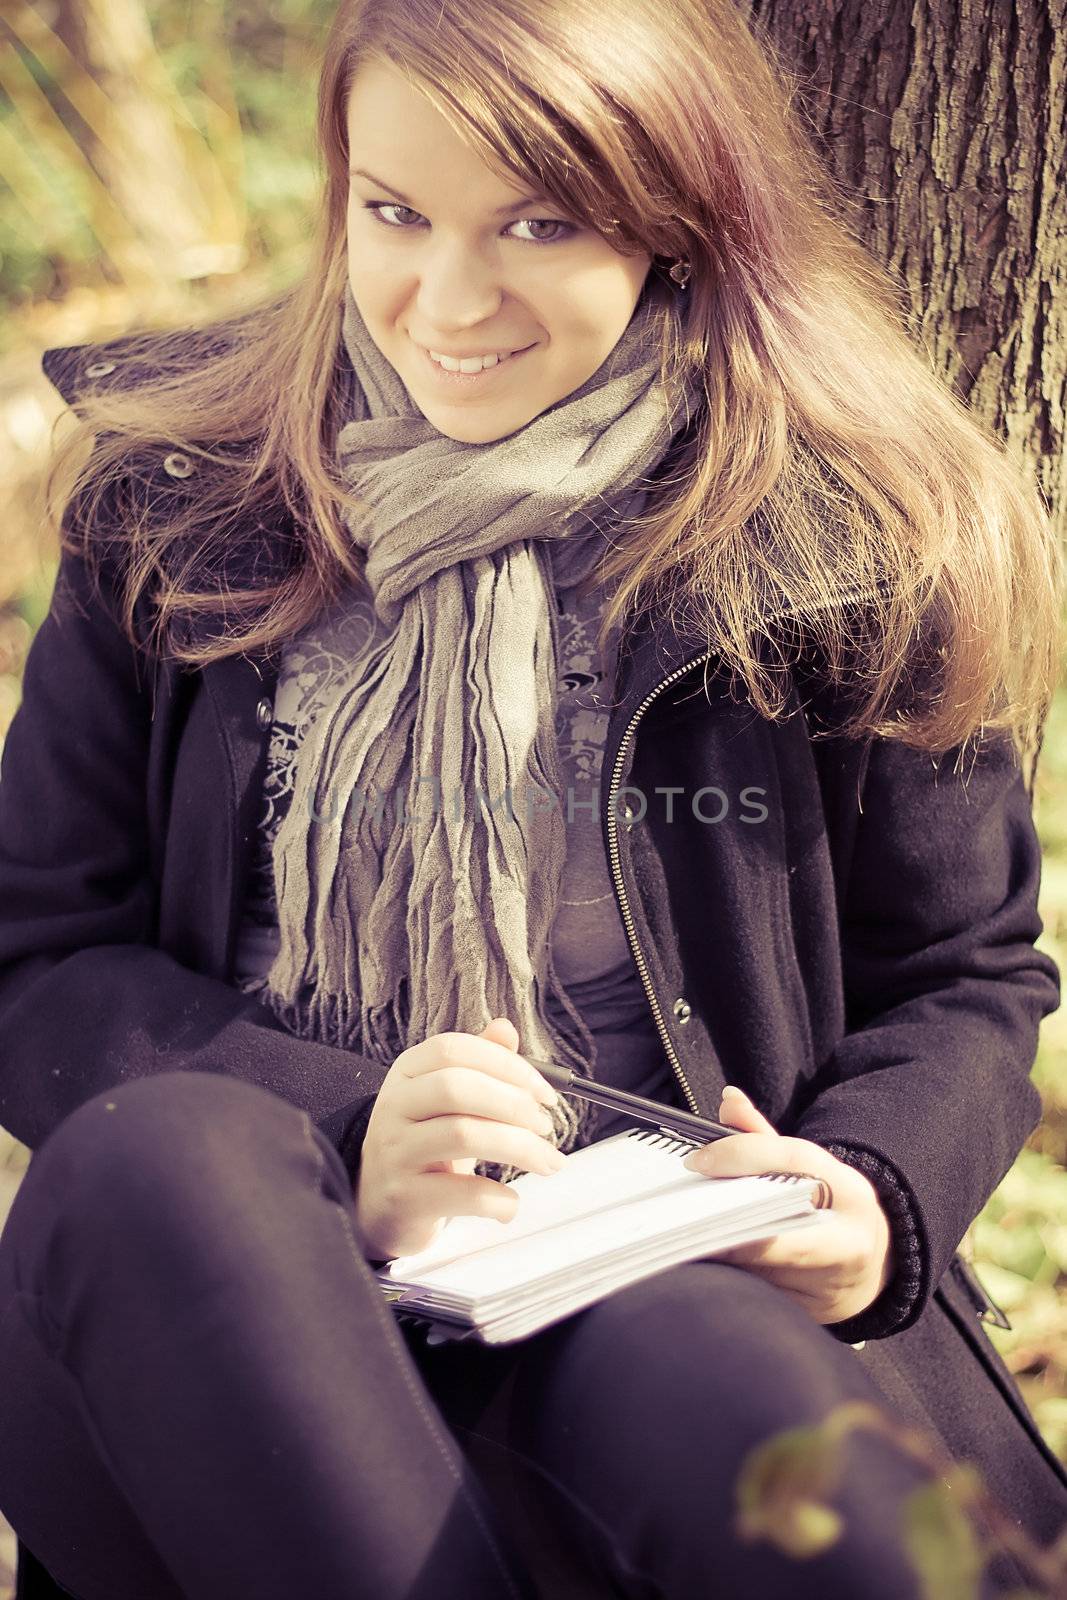 A girl writes on a pad in the park outdoors shooting